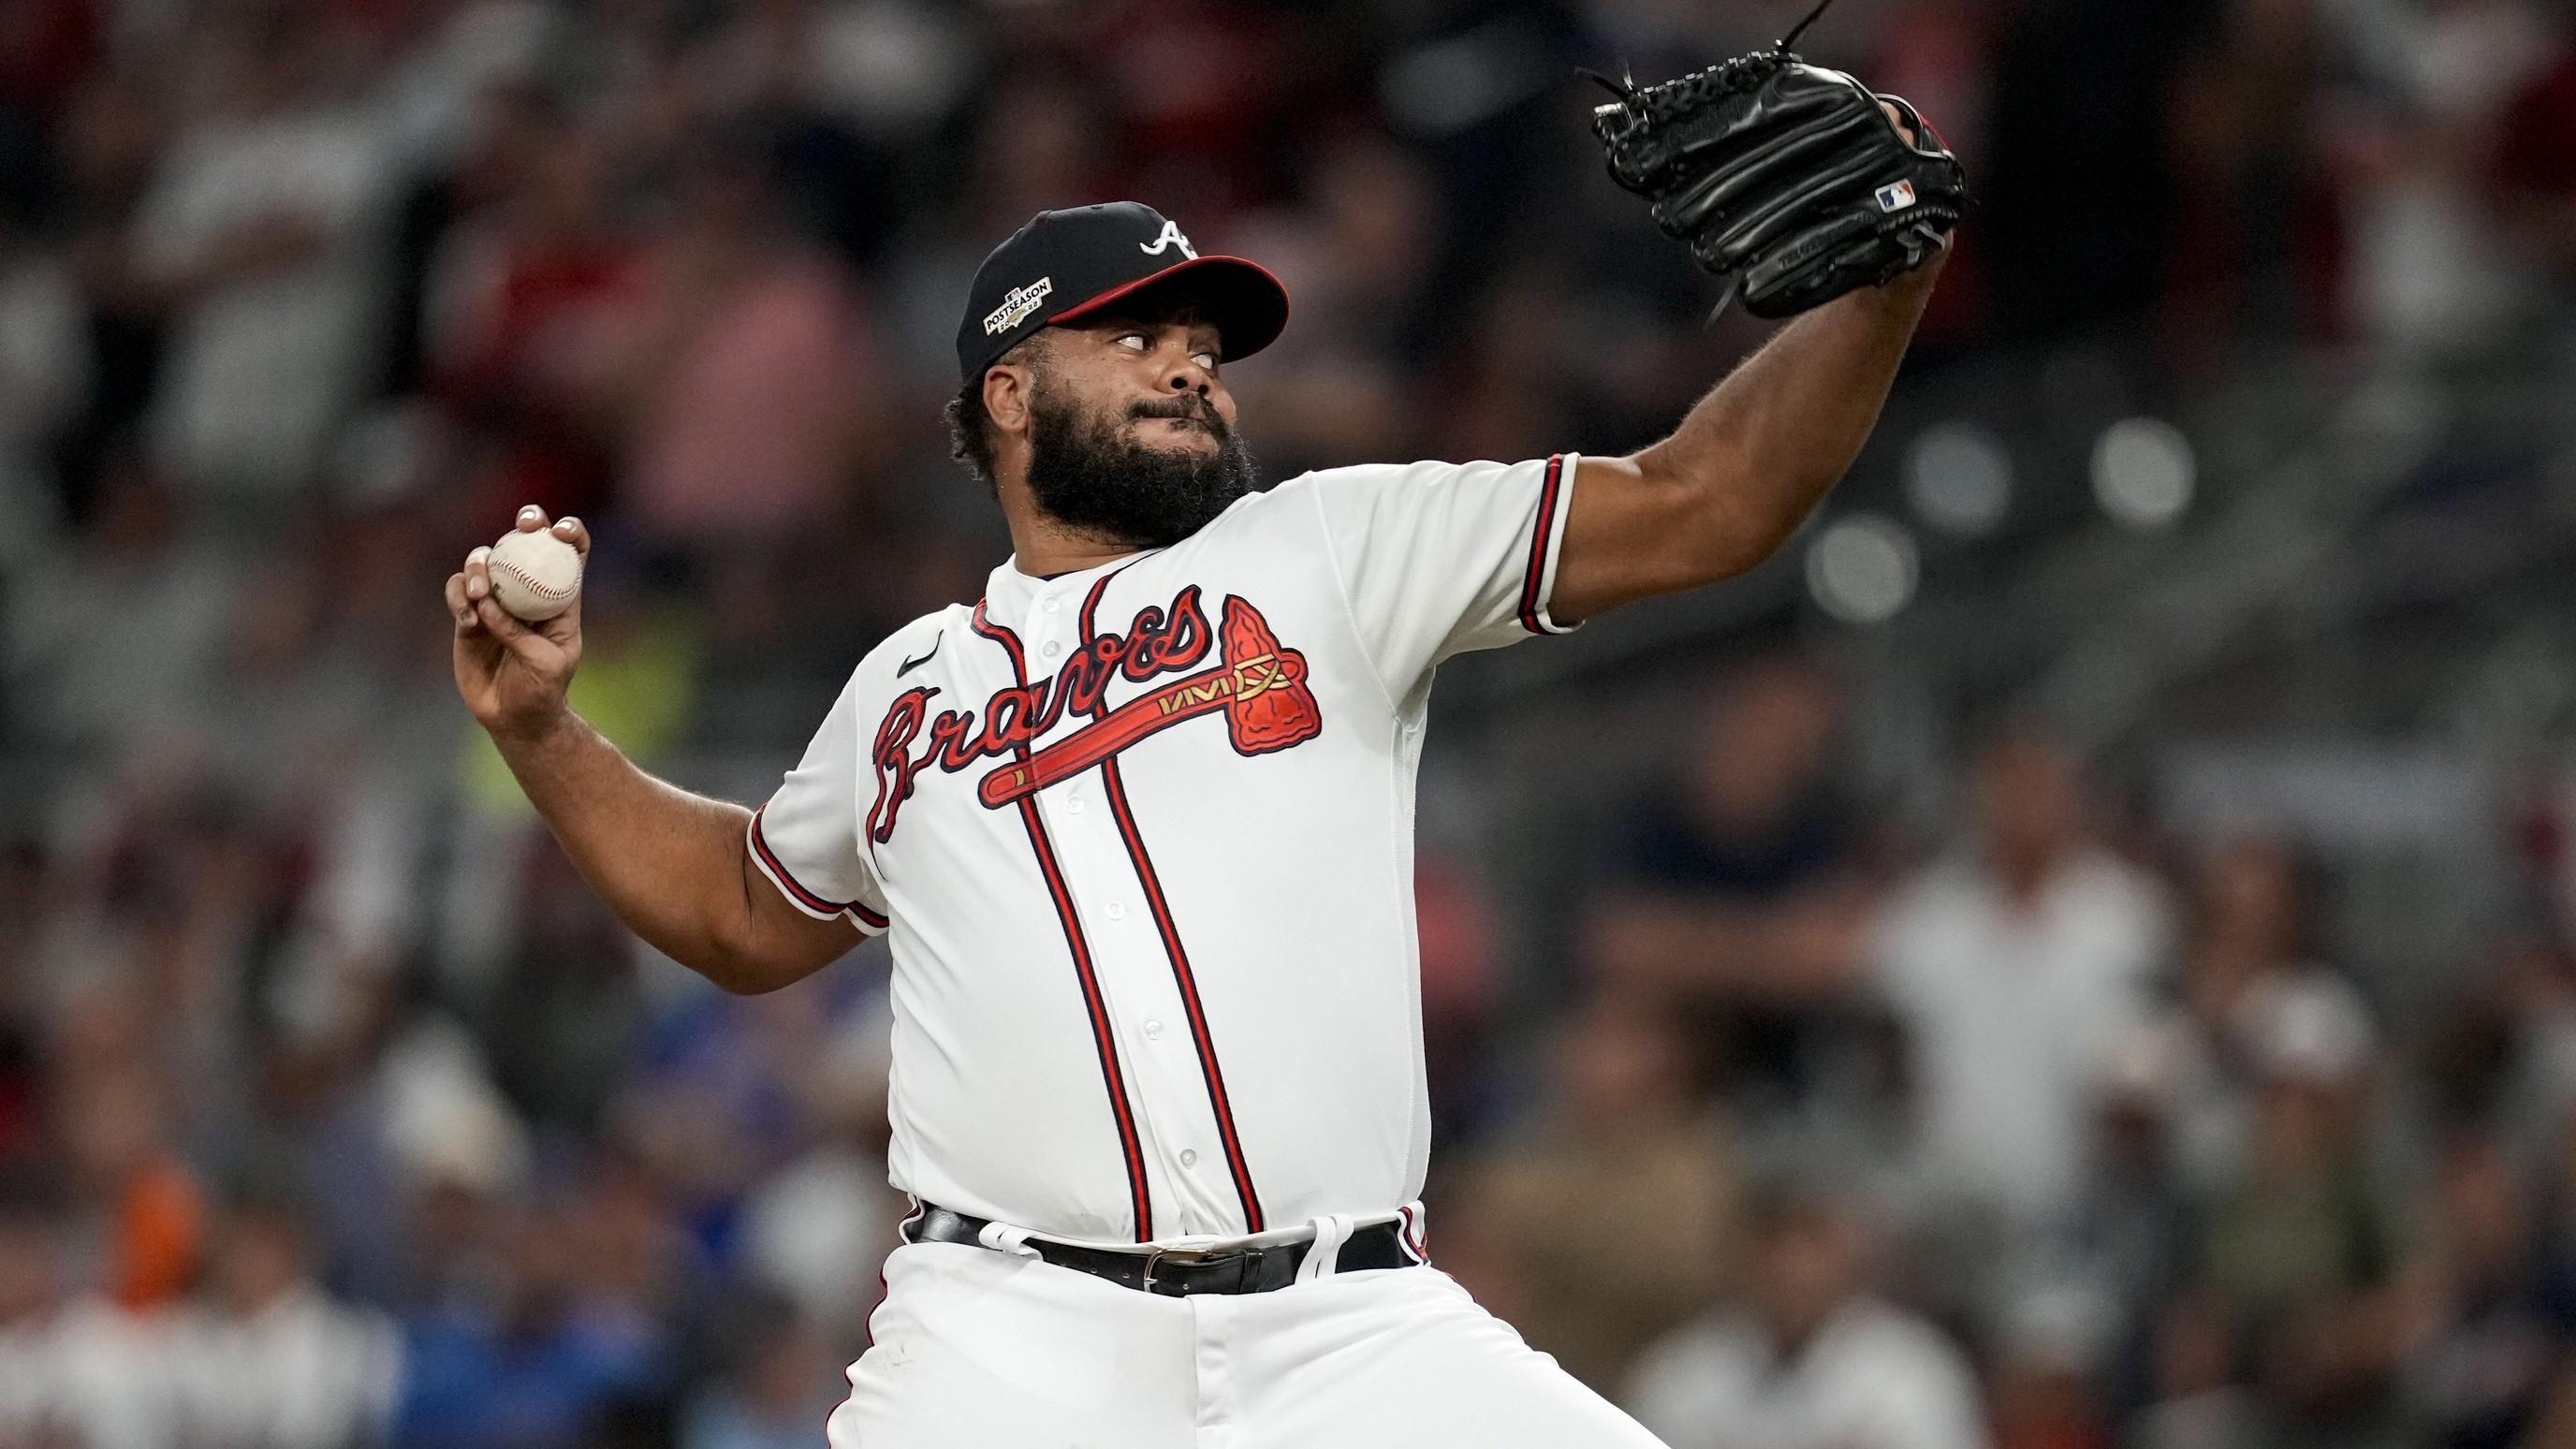 Oct 12, 2022; Atlanta, Georgia, USA; Atlanta Braves relief pitcher Kenley Jansen (74) throws against the Philadelphia Phillies in the ninth inning during game two of the NLDS for the 2022 MLB Playoffs at Truist Park / Dale Zanine-USA TODAY Sports